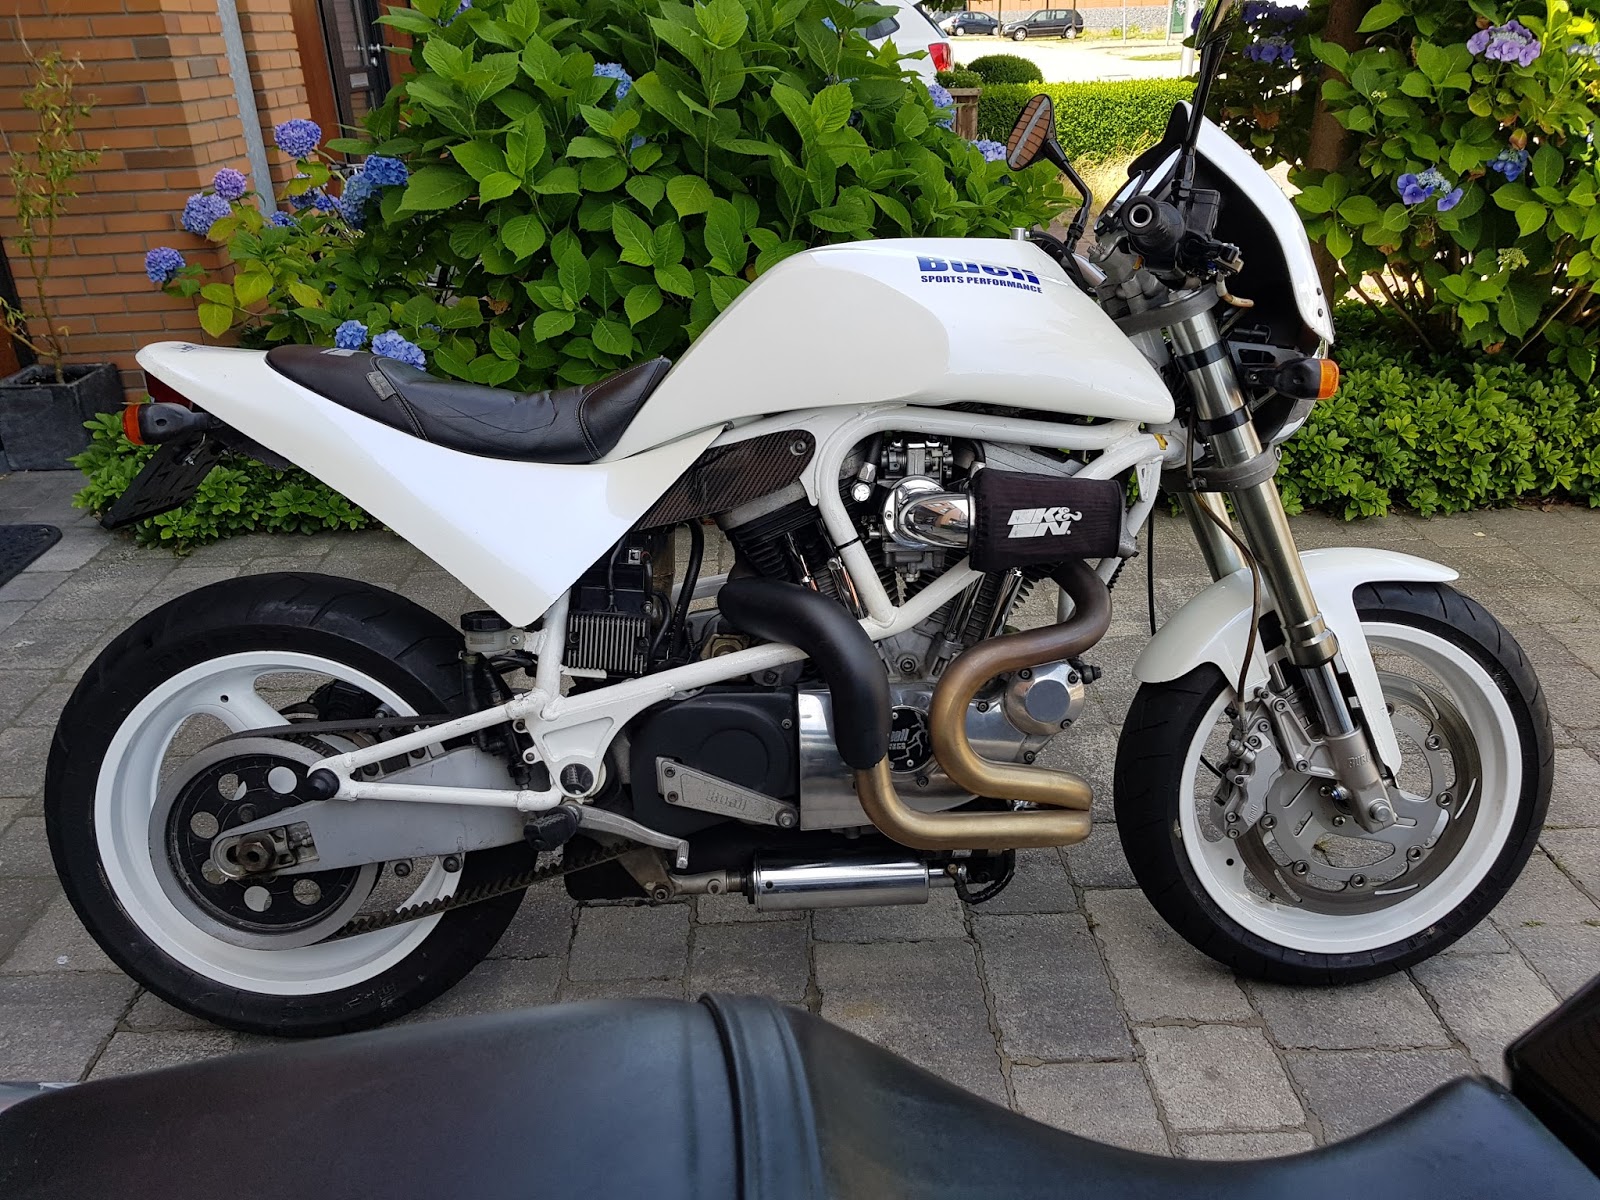 BUELL S1